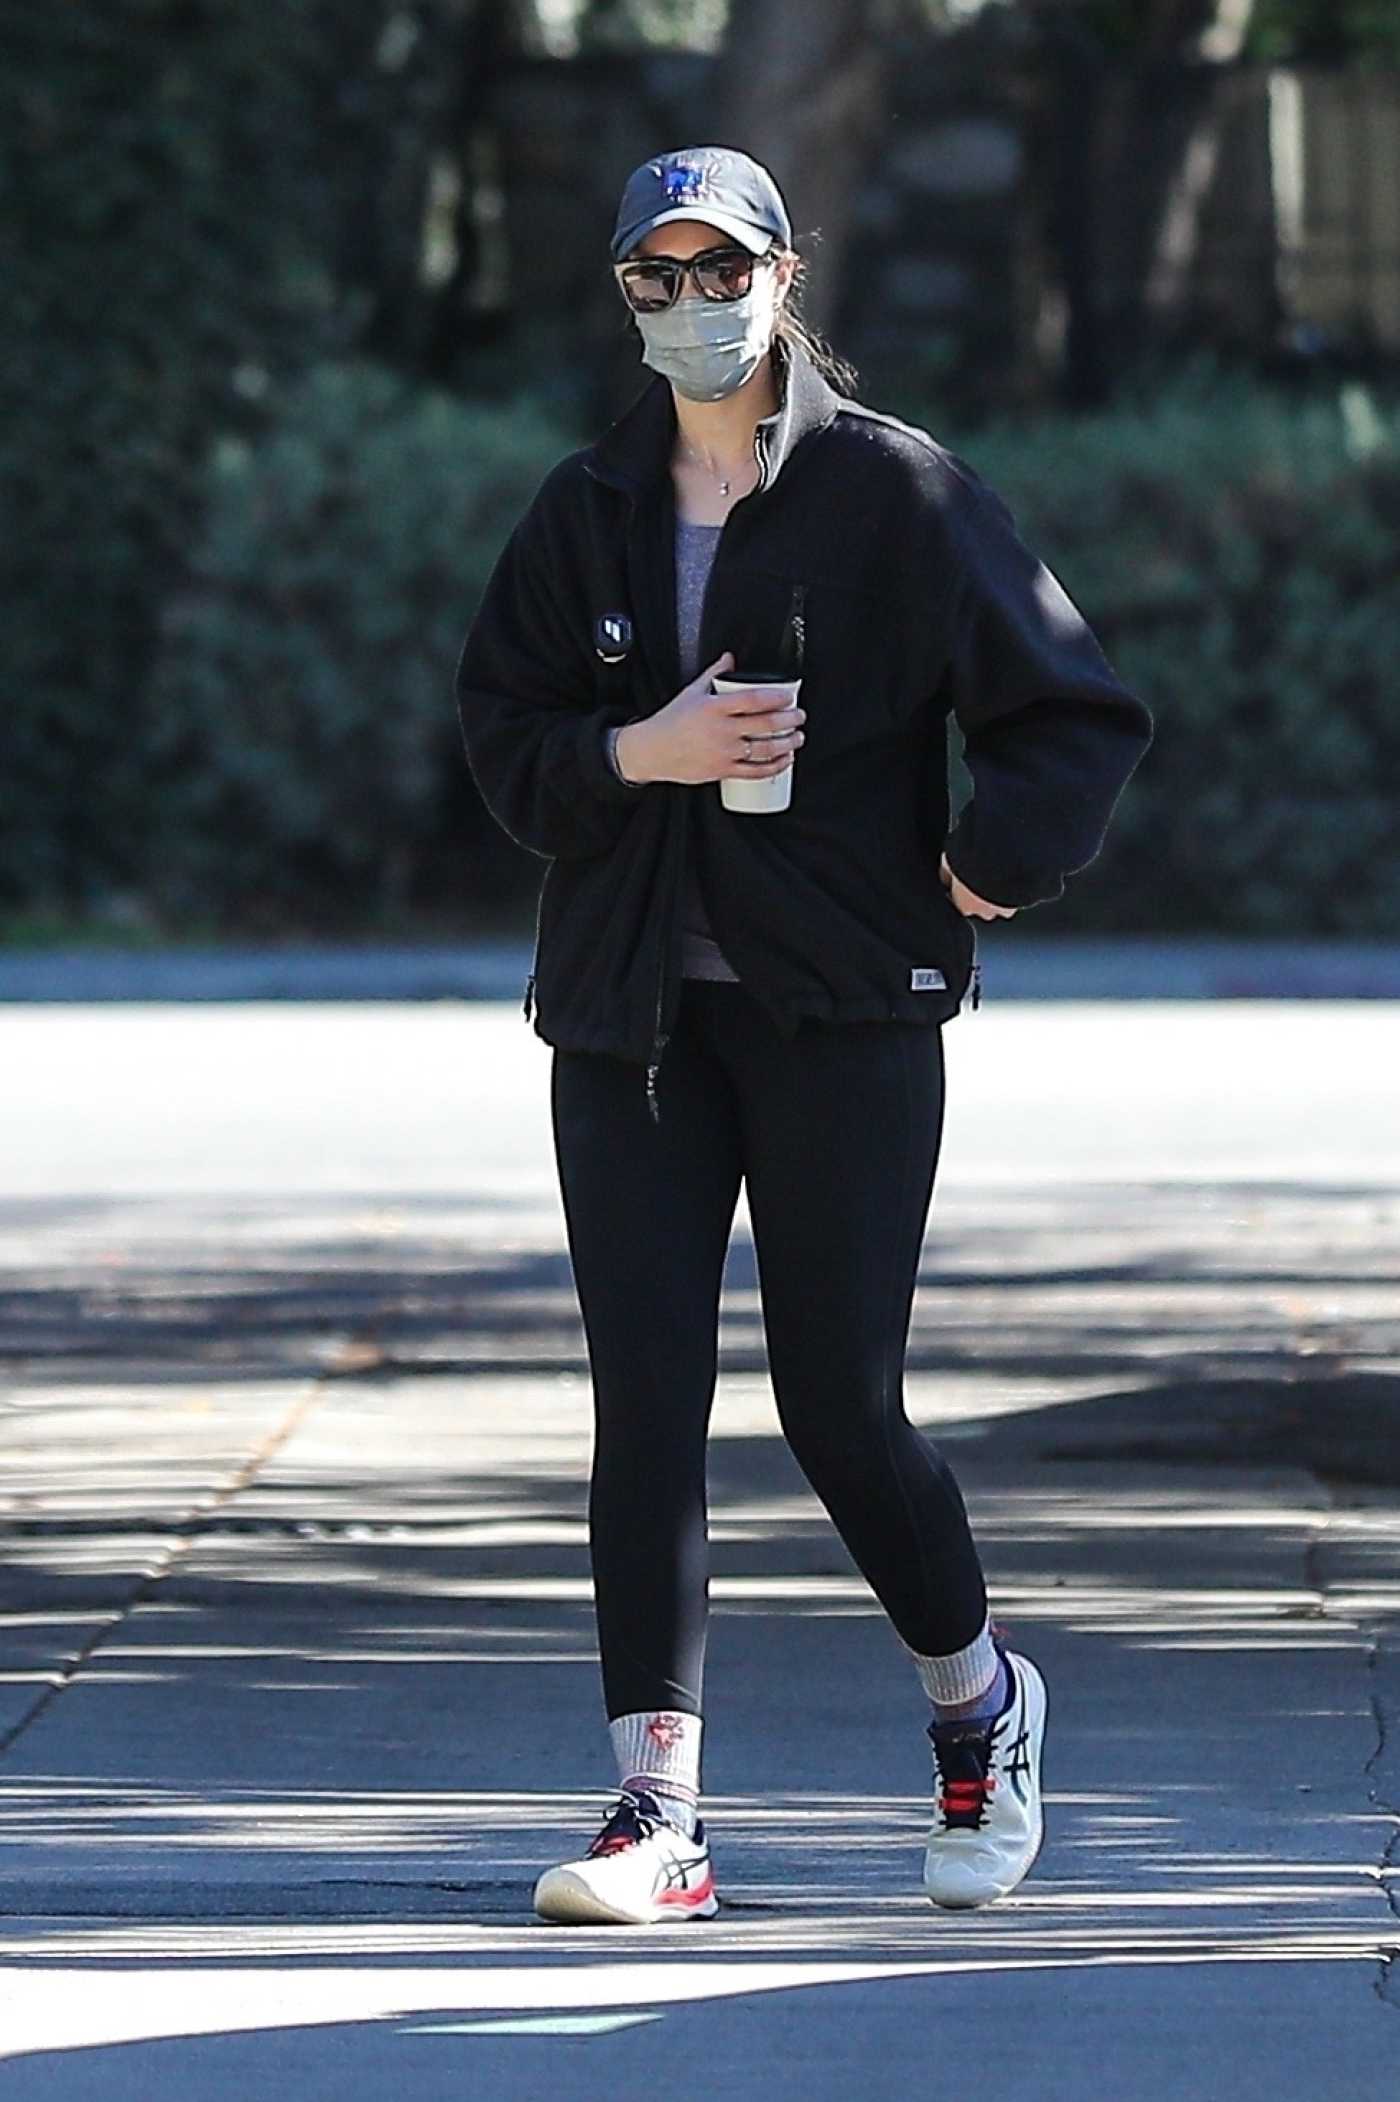 Christina Schwarzenegger in a White Sneakers Exits a Tennis Practice in Brentwood 02/22/2021